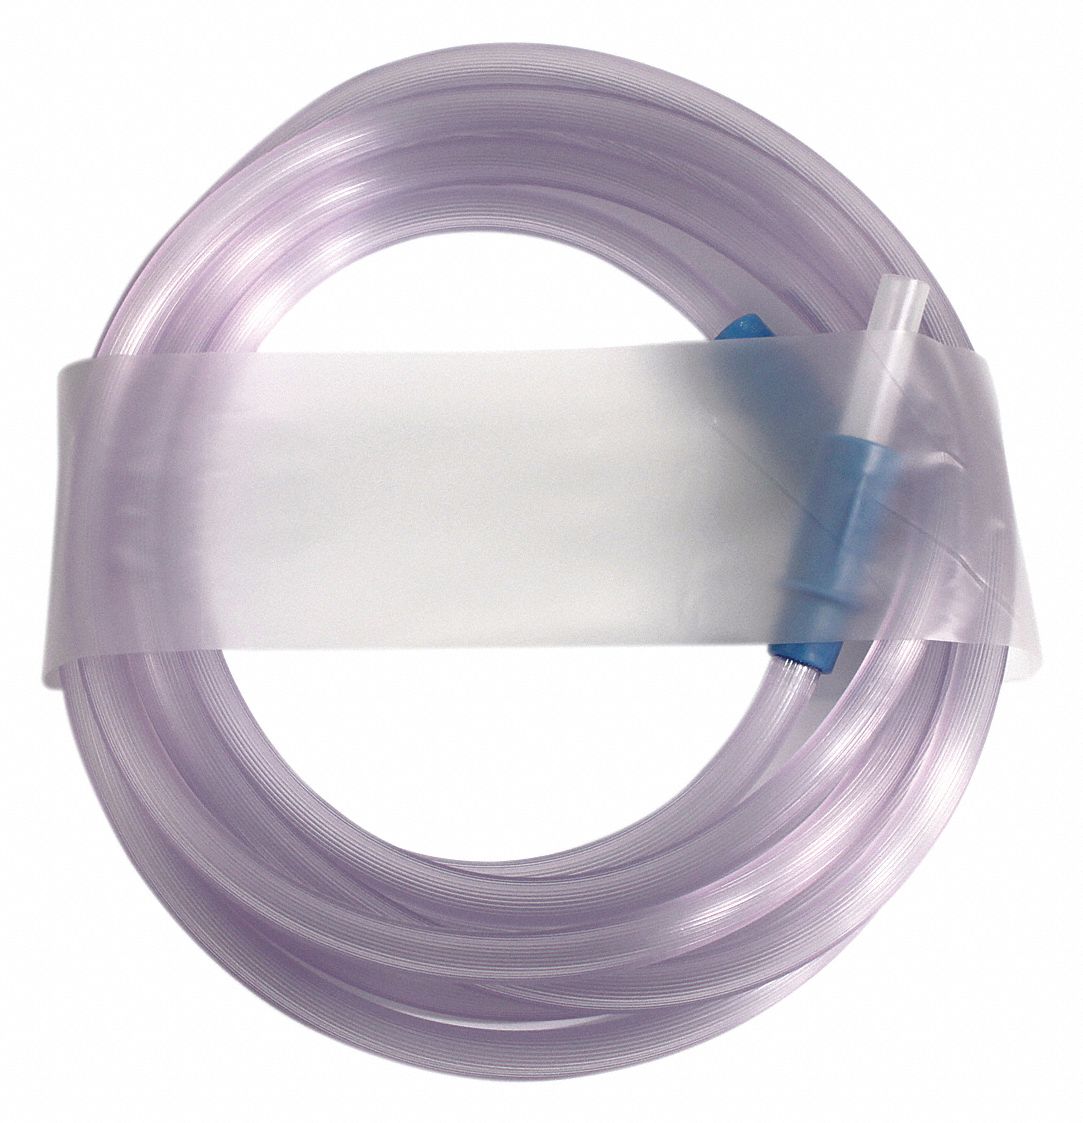 36PW15 - Suction Tubing 6-23/64 in x 254 ft. PK50